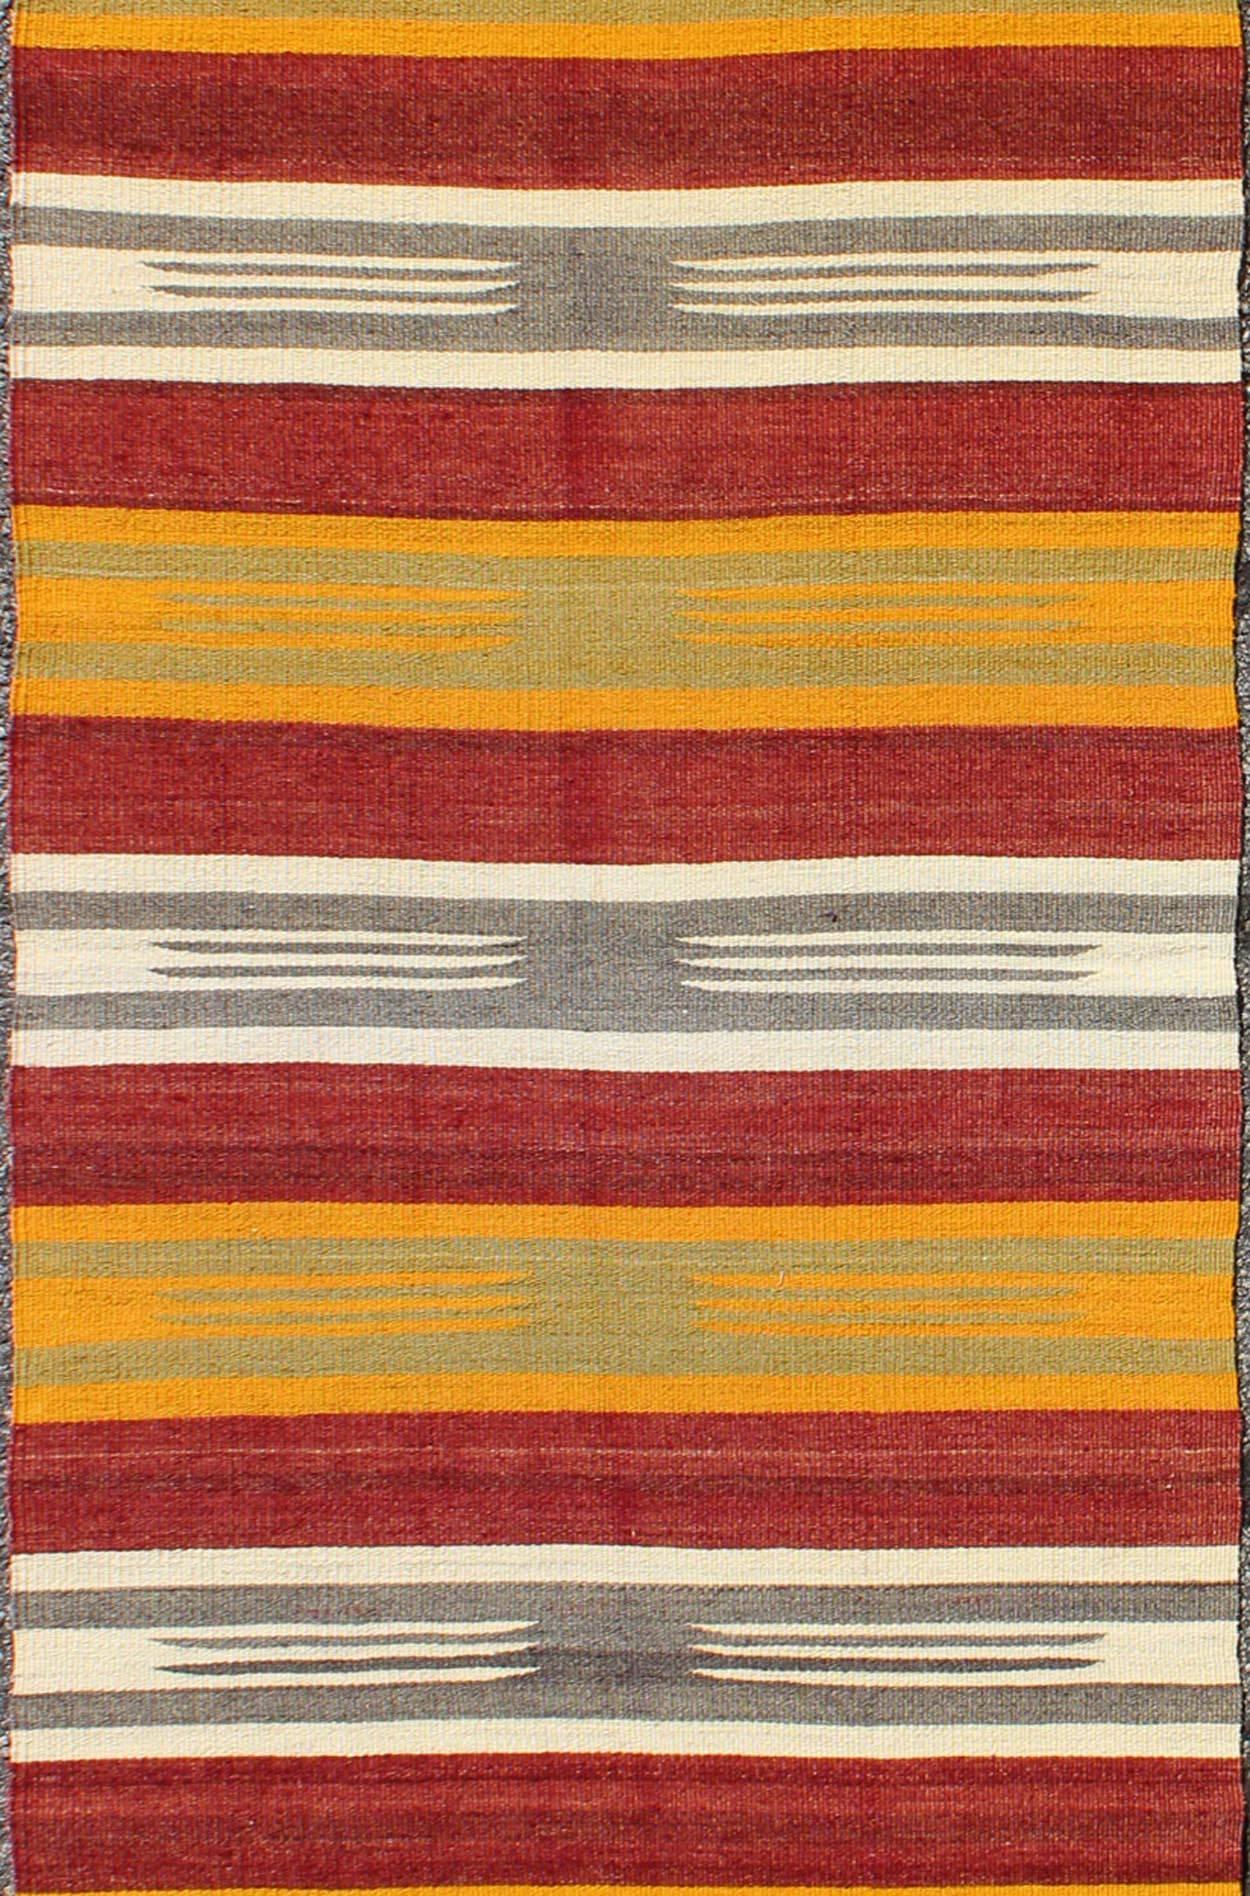 Vintage Turkish Kilim Runner with Stripes in Red, Green, Yellow, Ivory, Gray In Excellent Condition For Sale In Atlanta, GA